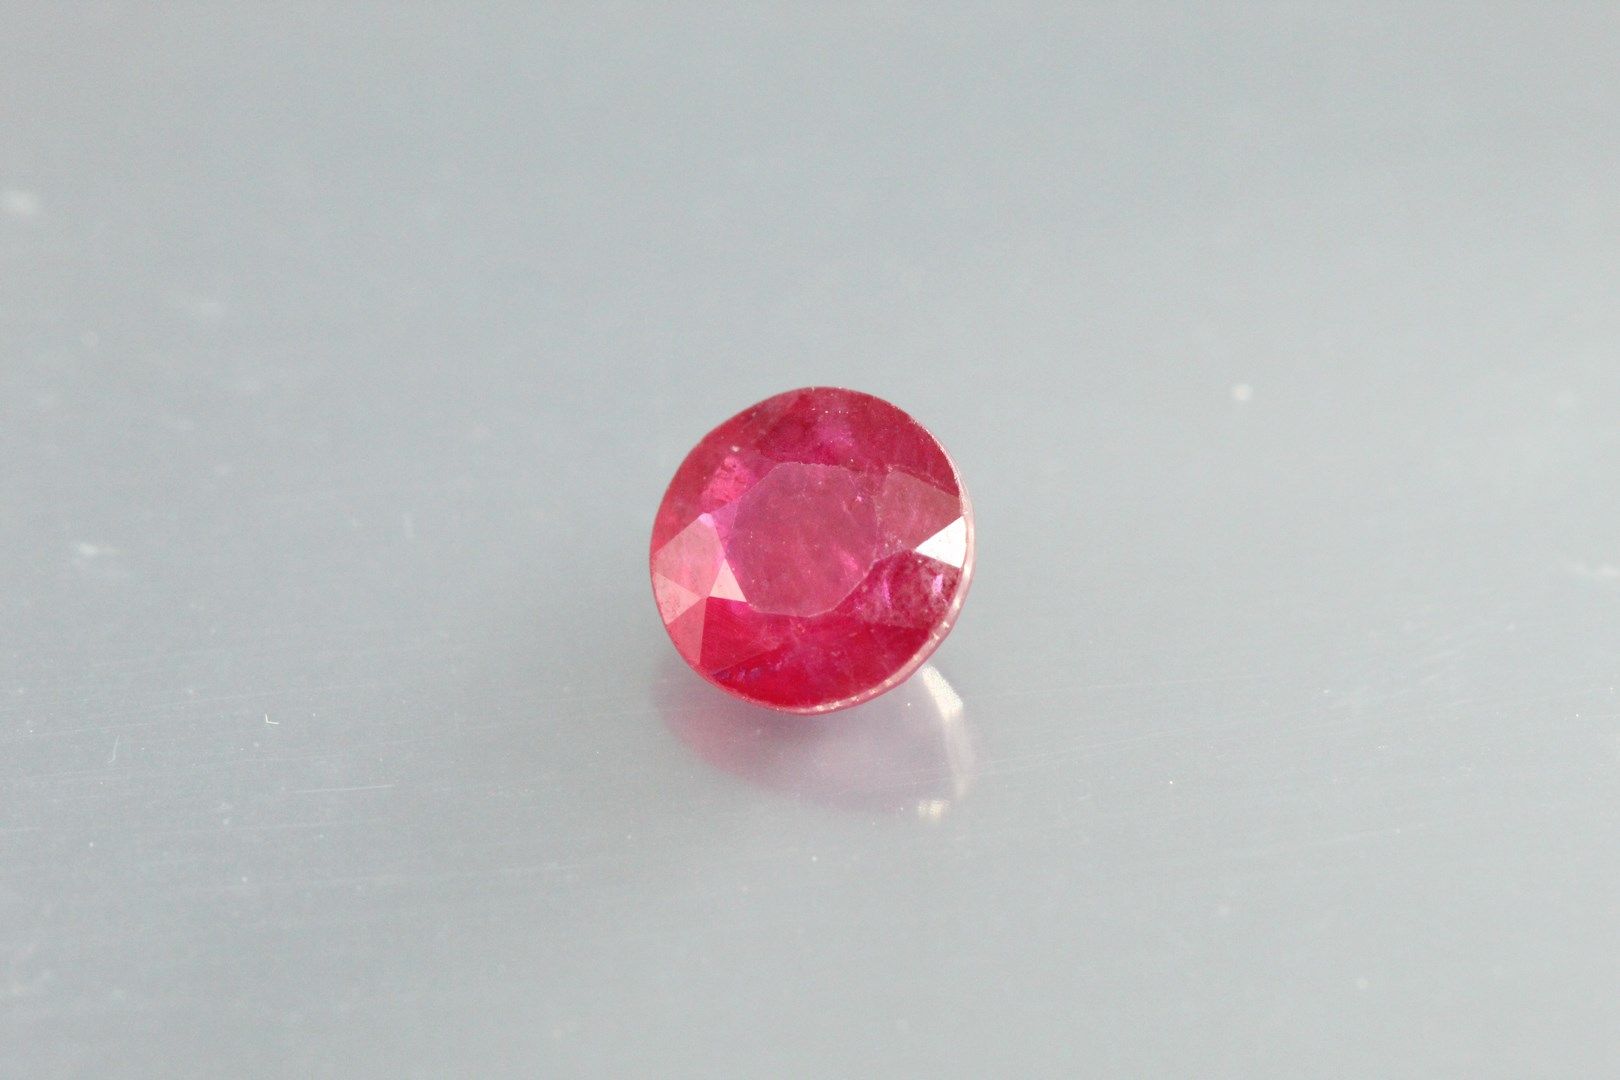 Null Round ruby on paper.

Weight : 0,97 ct. 

Plan of detachment.